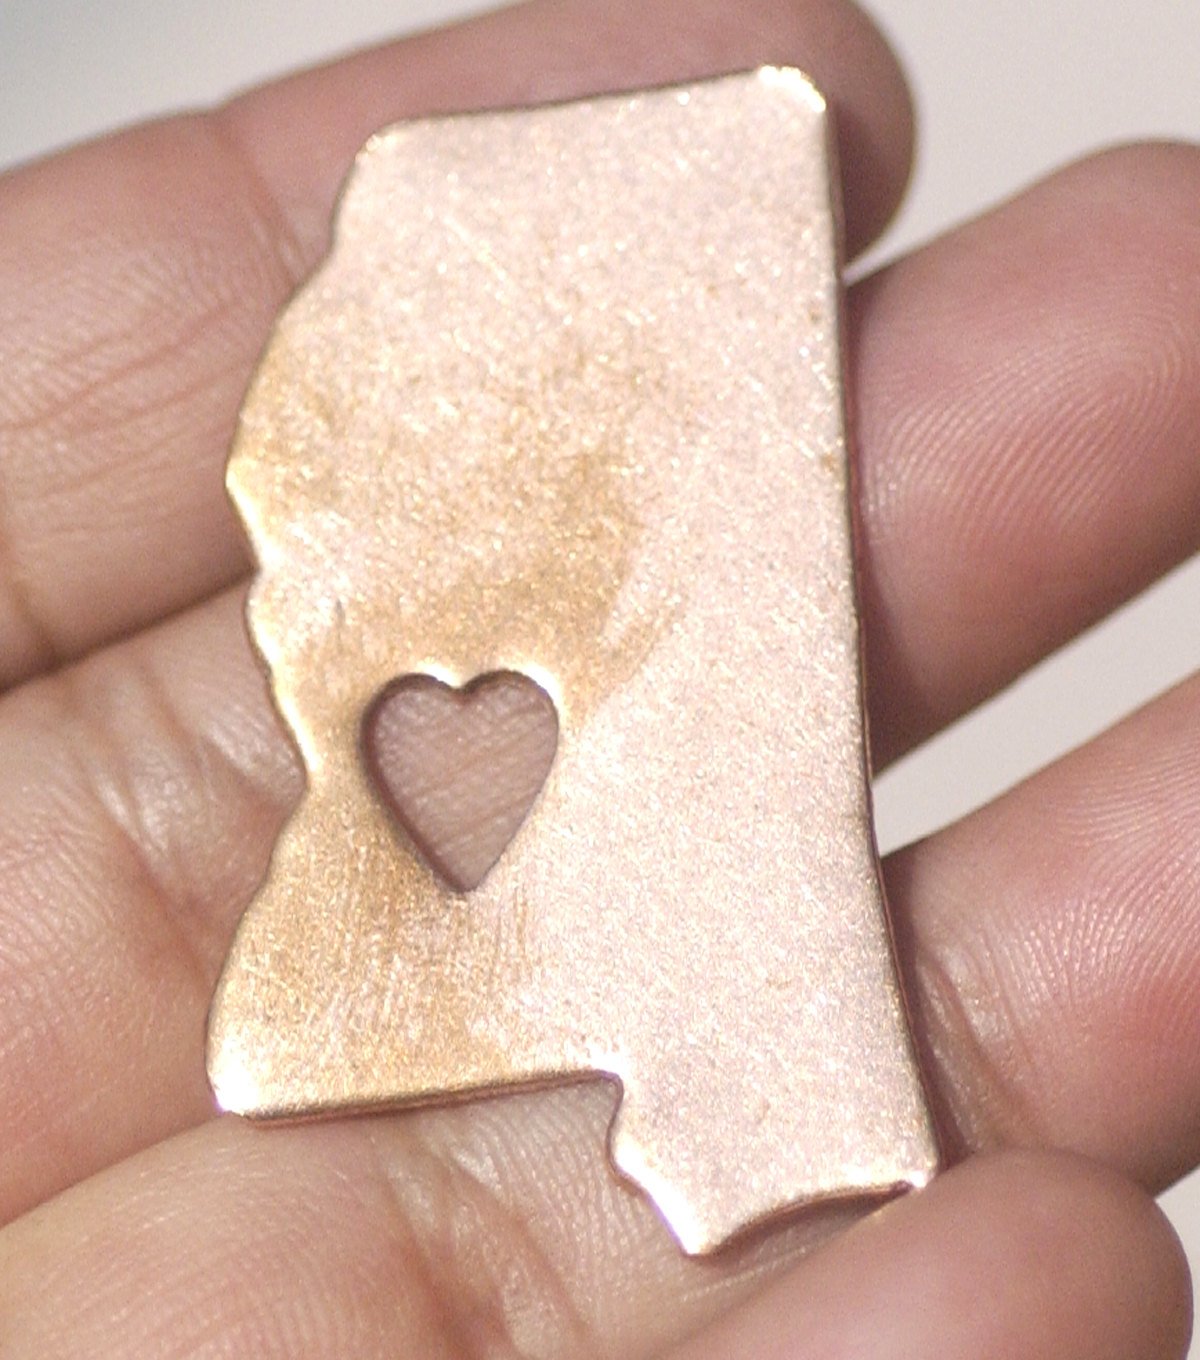 Mississippi State with Large Tiny Heart Cutout for Enameling Metalworking Stamping Texturing 100% Copper Blank - 4 pieces